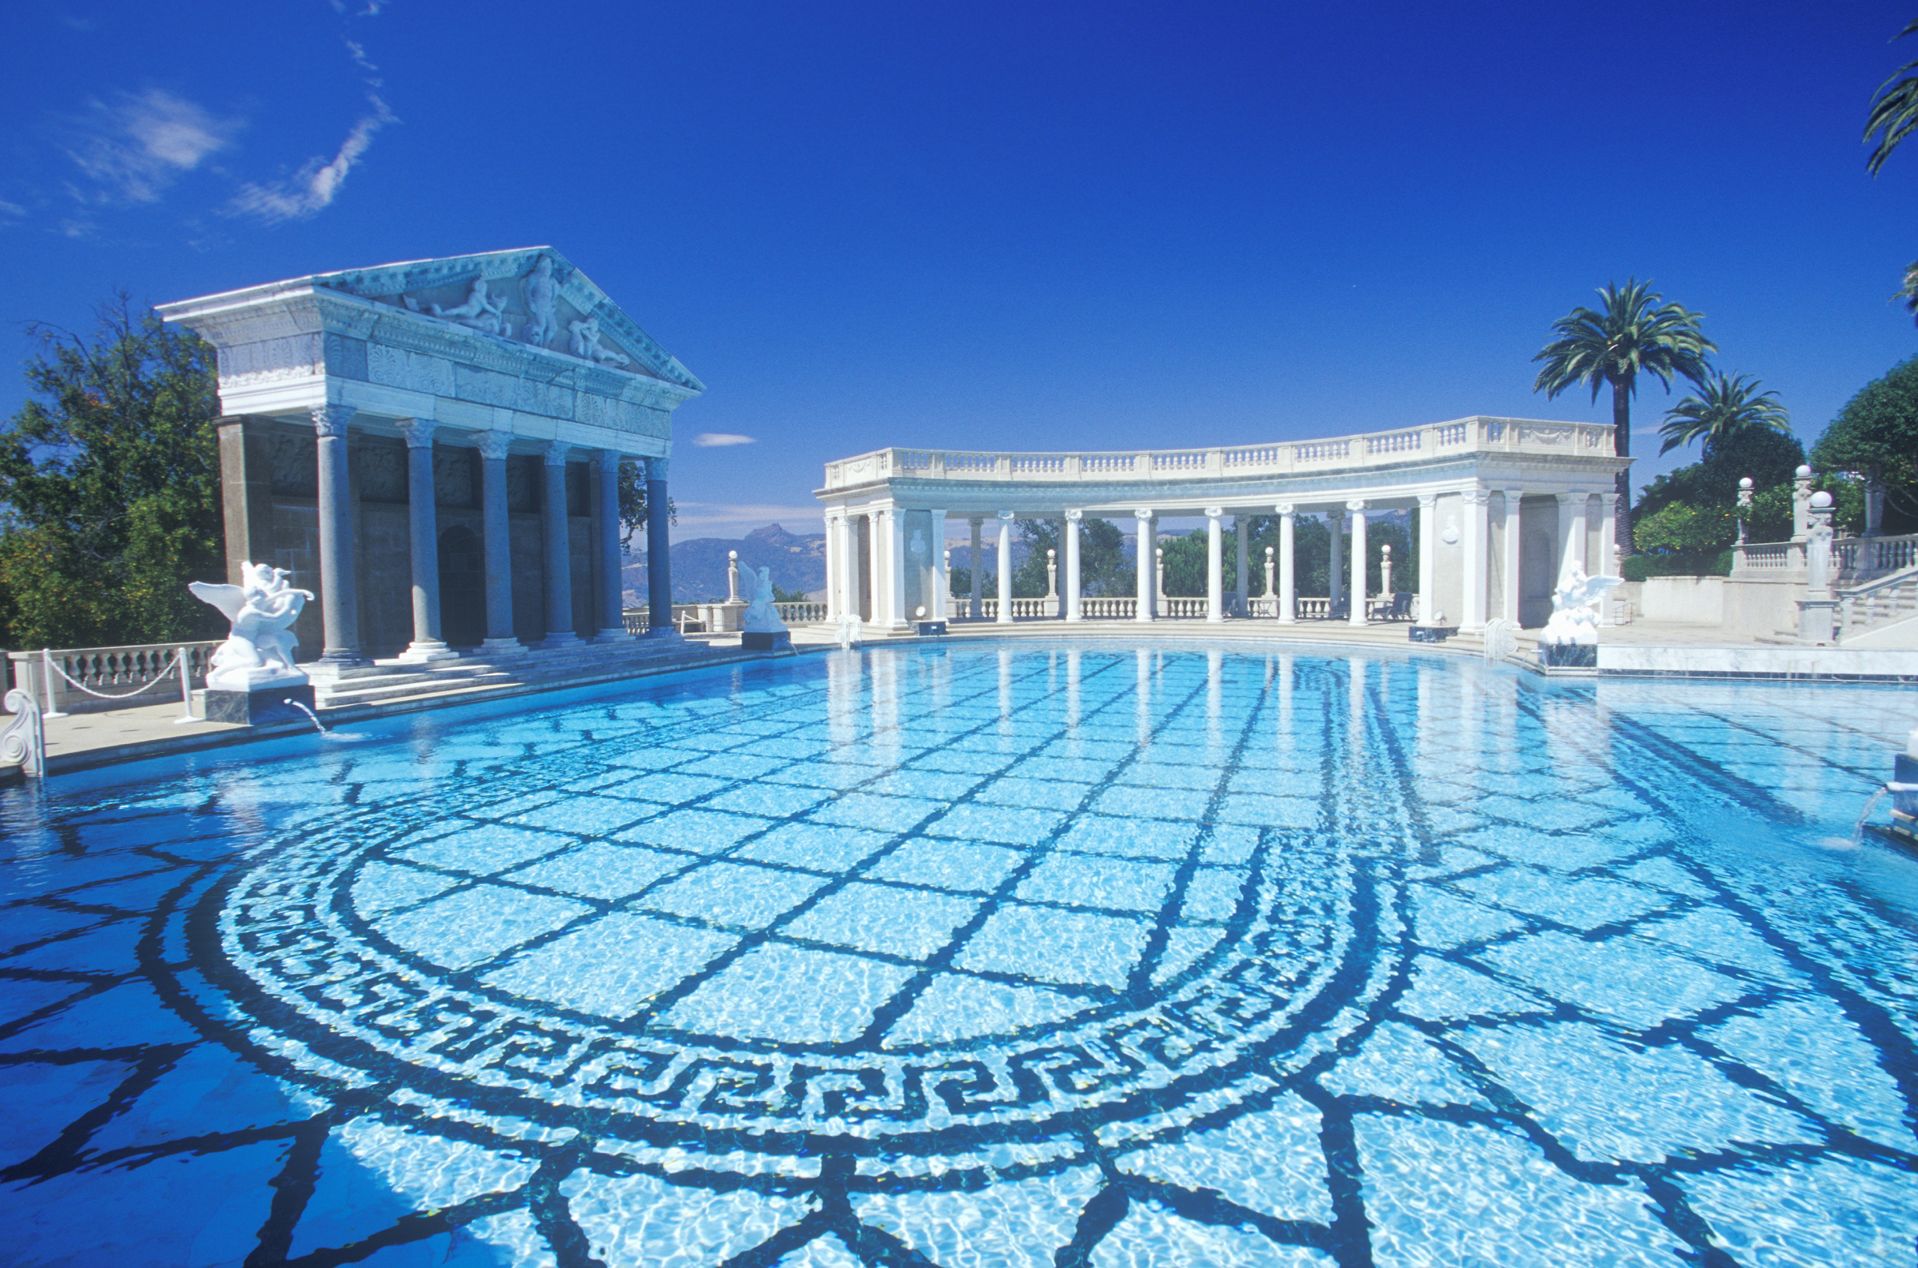 A Large Pool Of Water With Hearst Castle In The Background